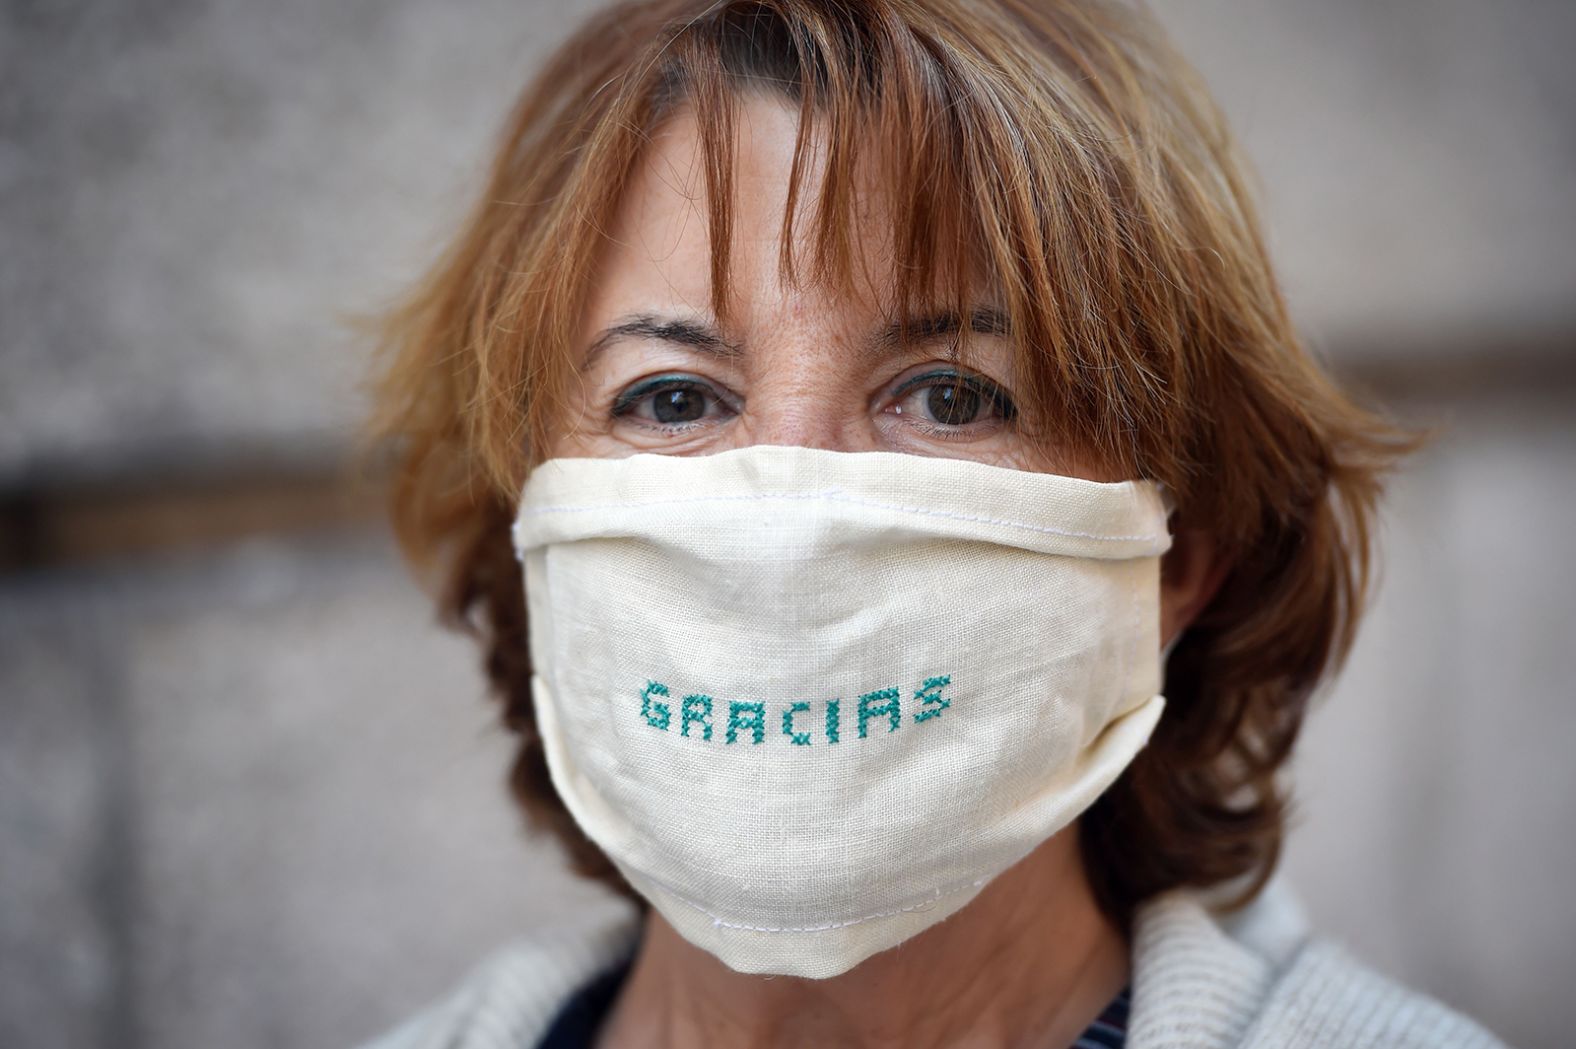 A woman in Coruna, Spain, wears a mask with the word "thanks" embroidered on it.